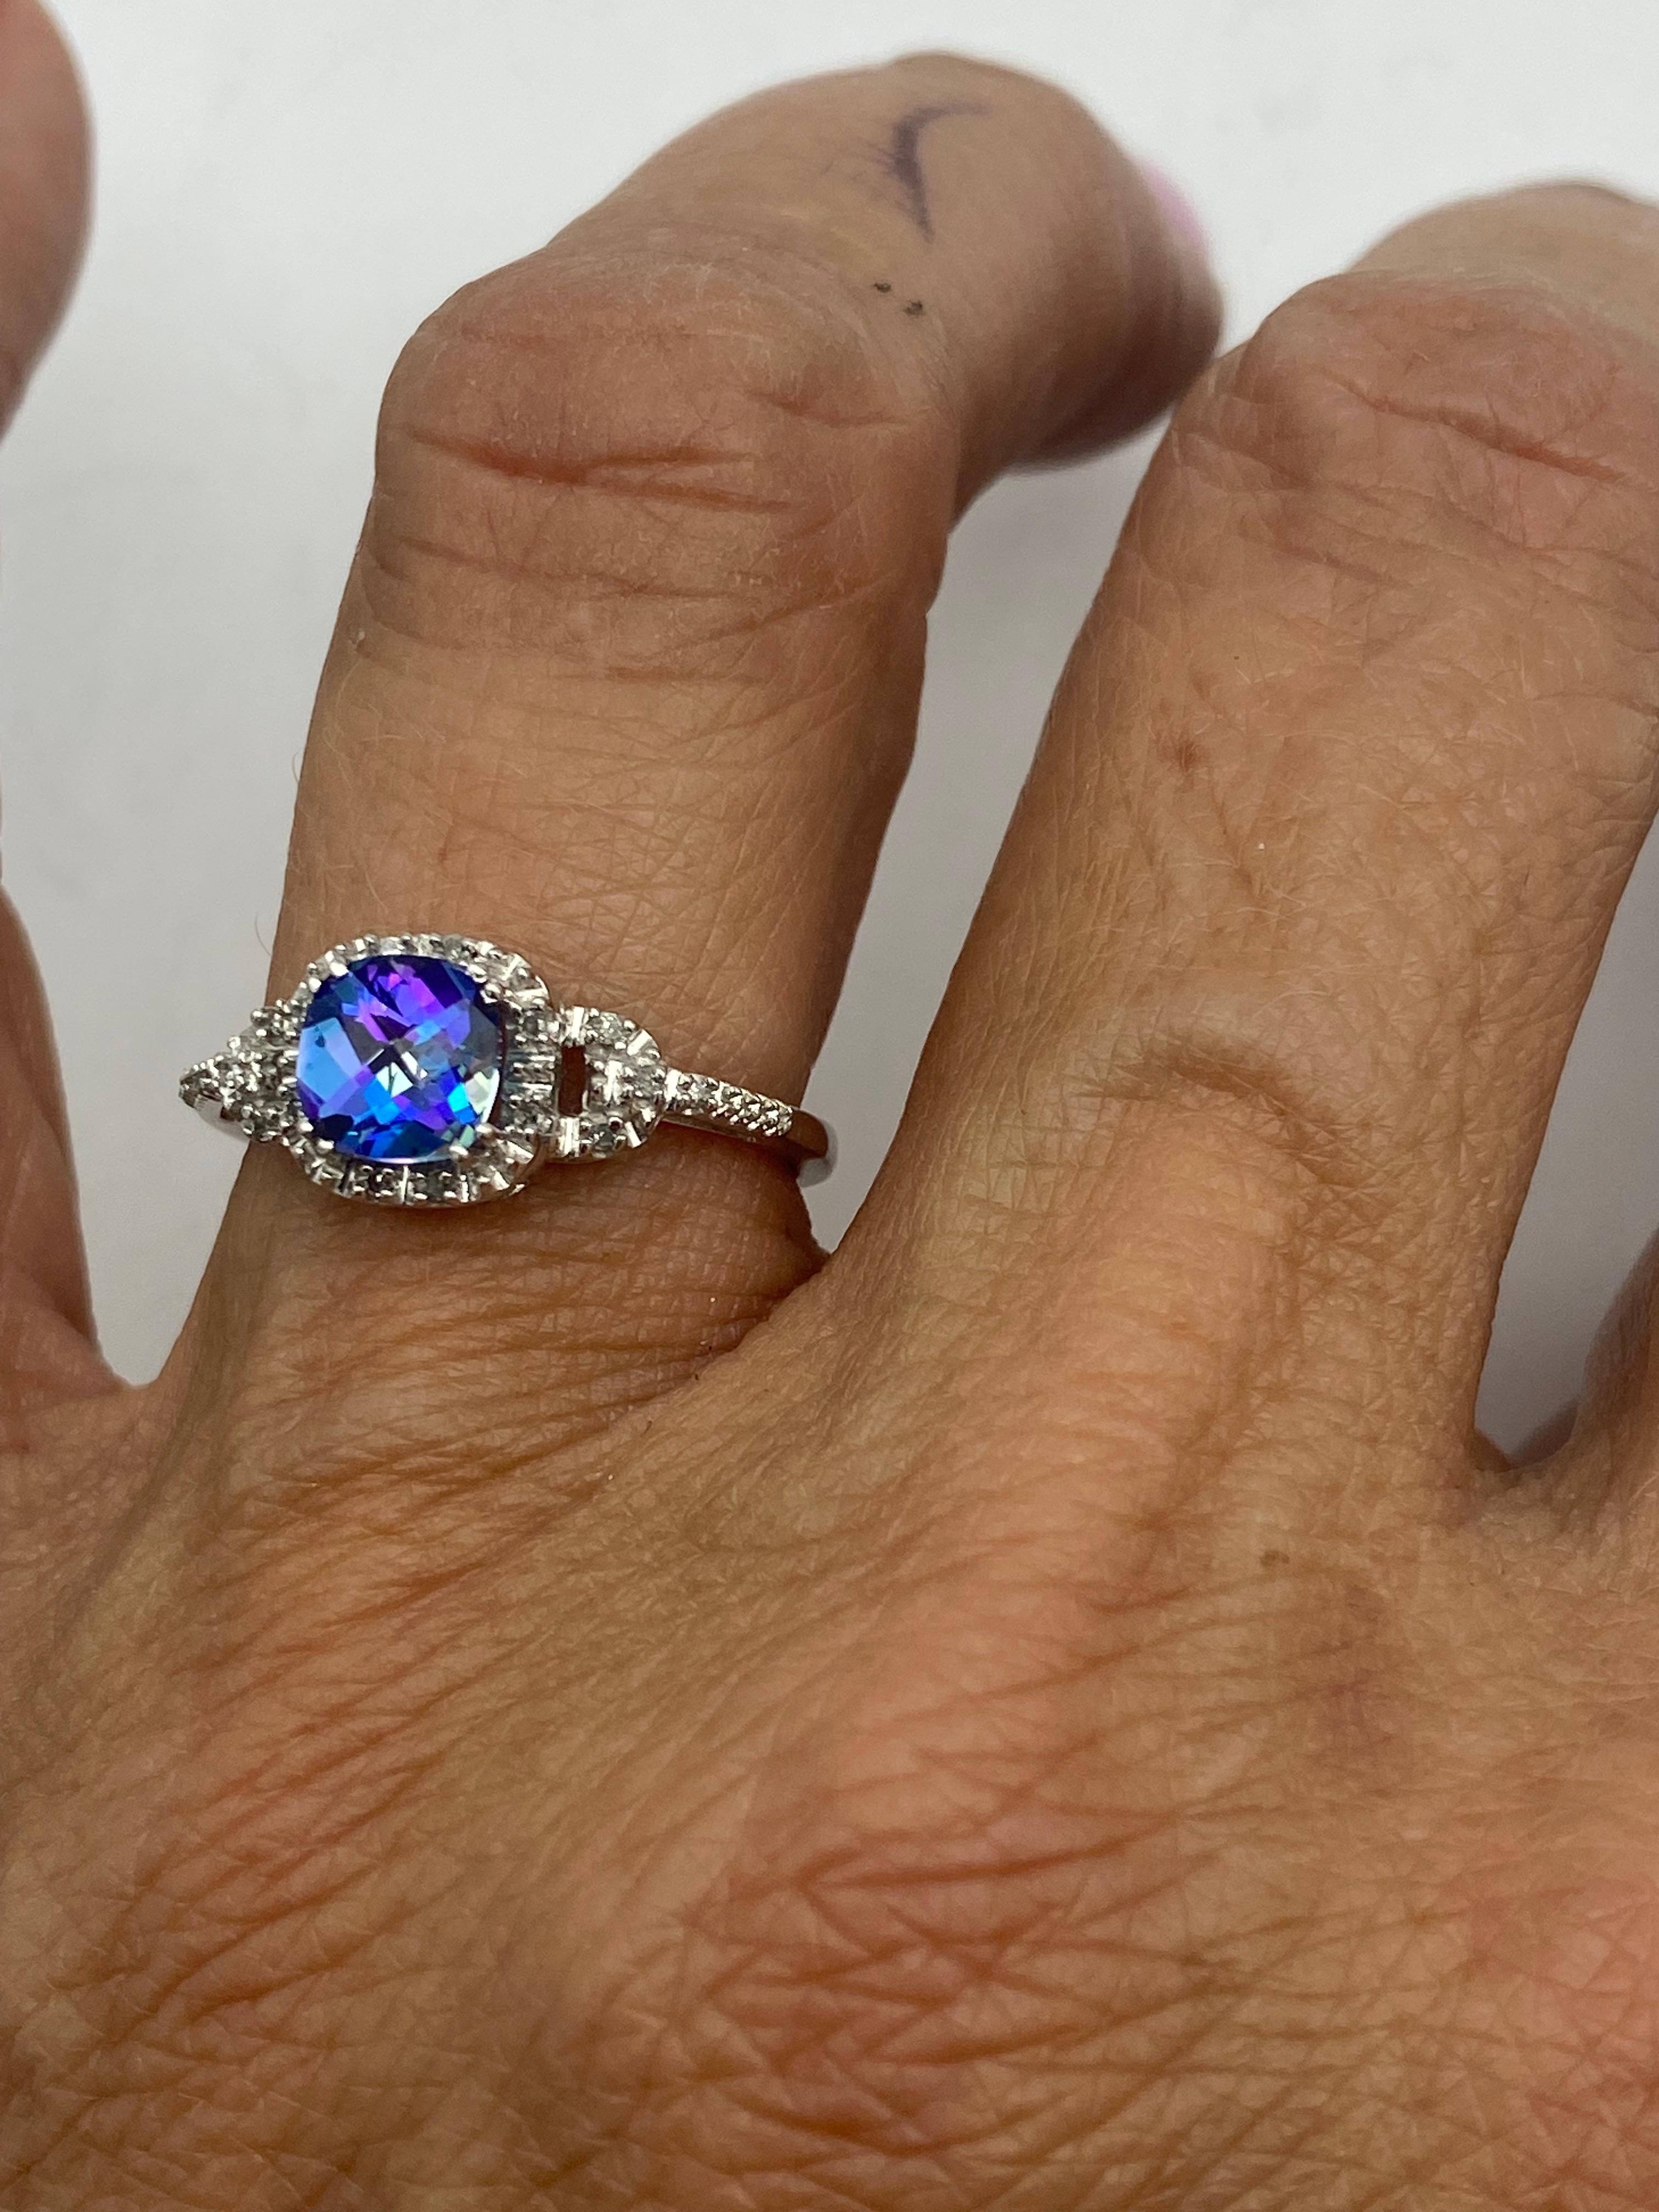 Rainbow Blue Mystic Topaz Diamond Halo Ring White Gold In Excellent Condition For Sale In Laguna Hills, CA